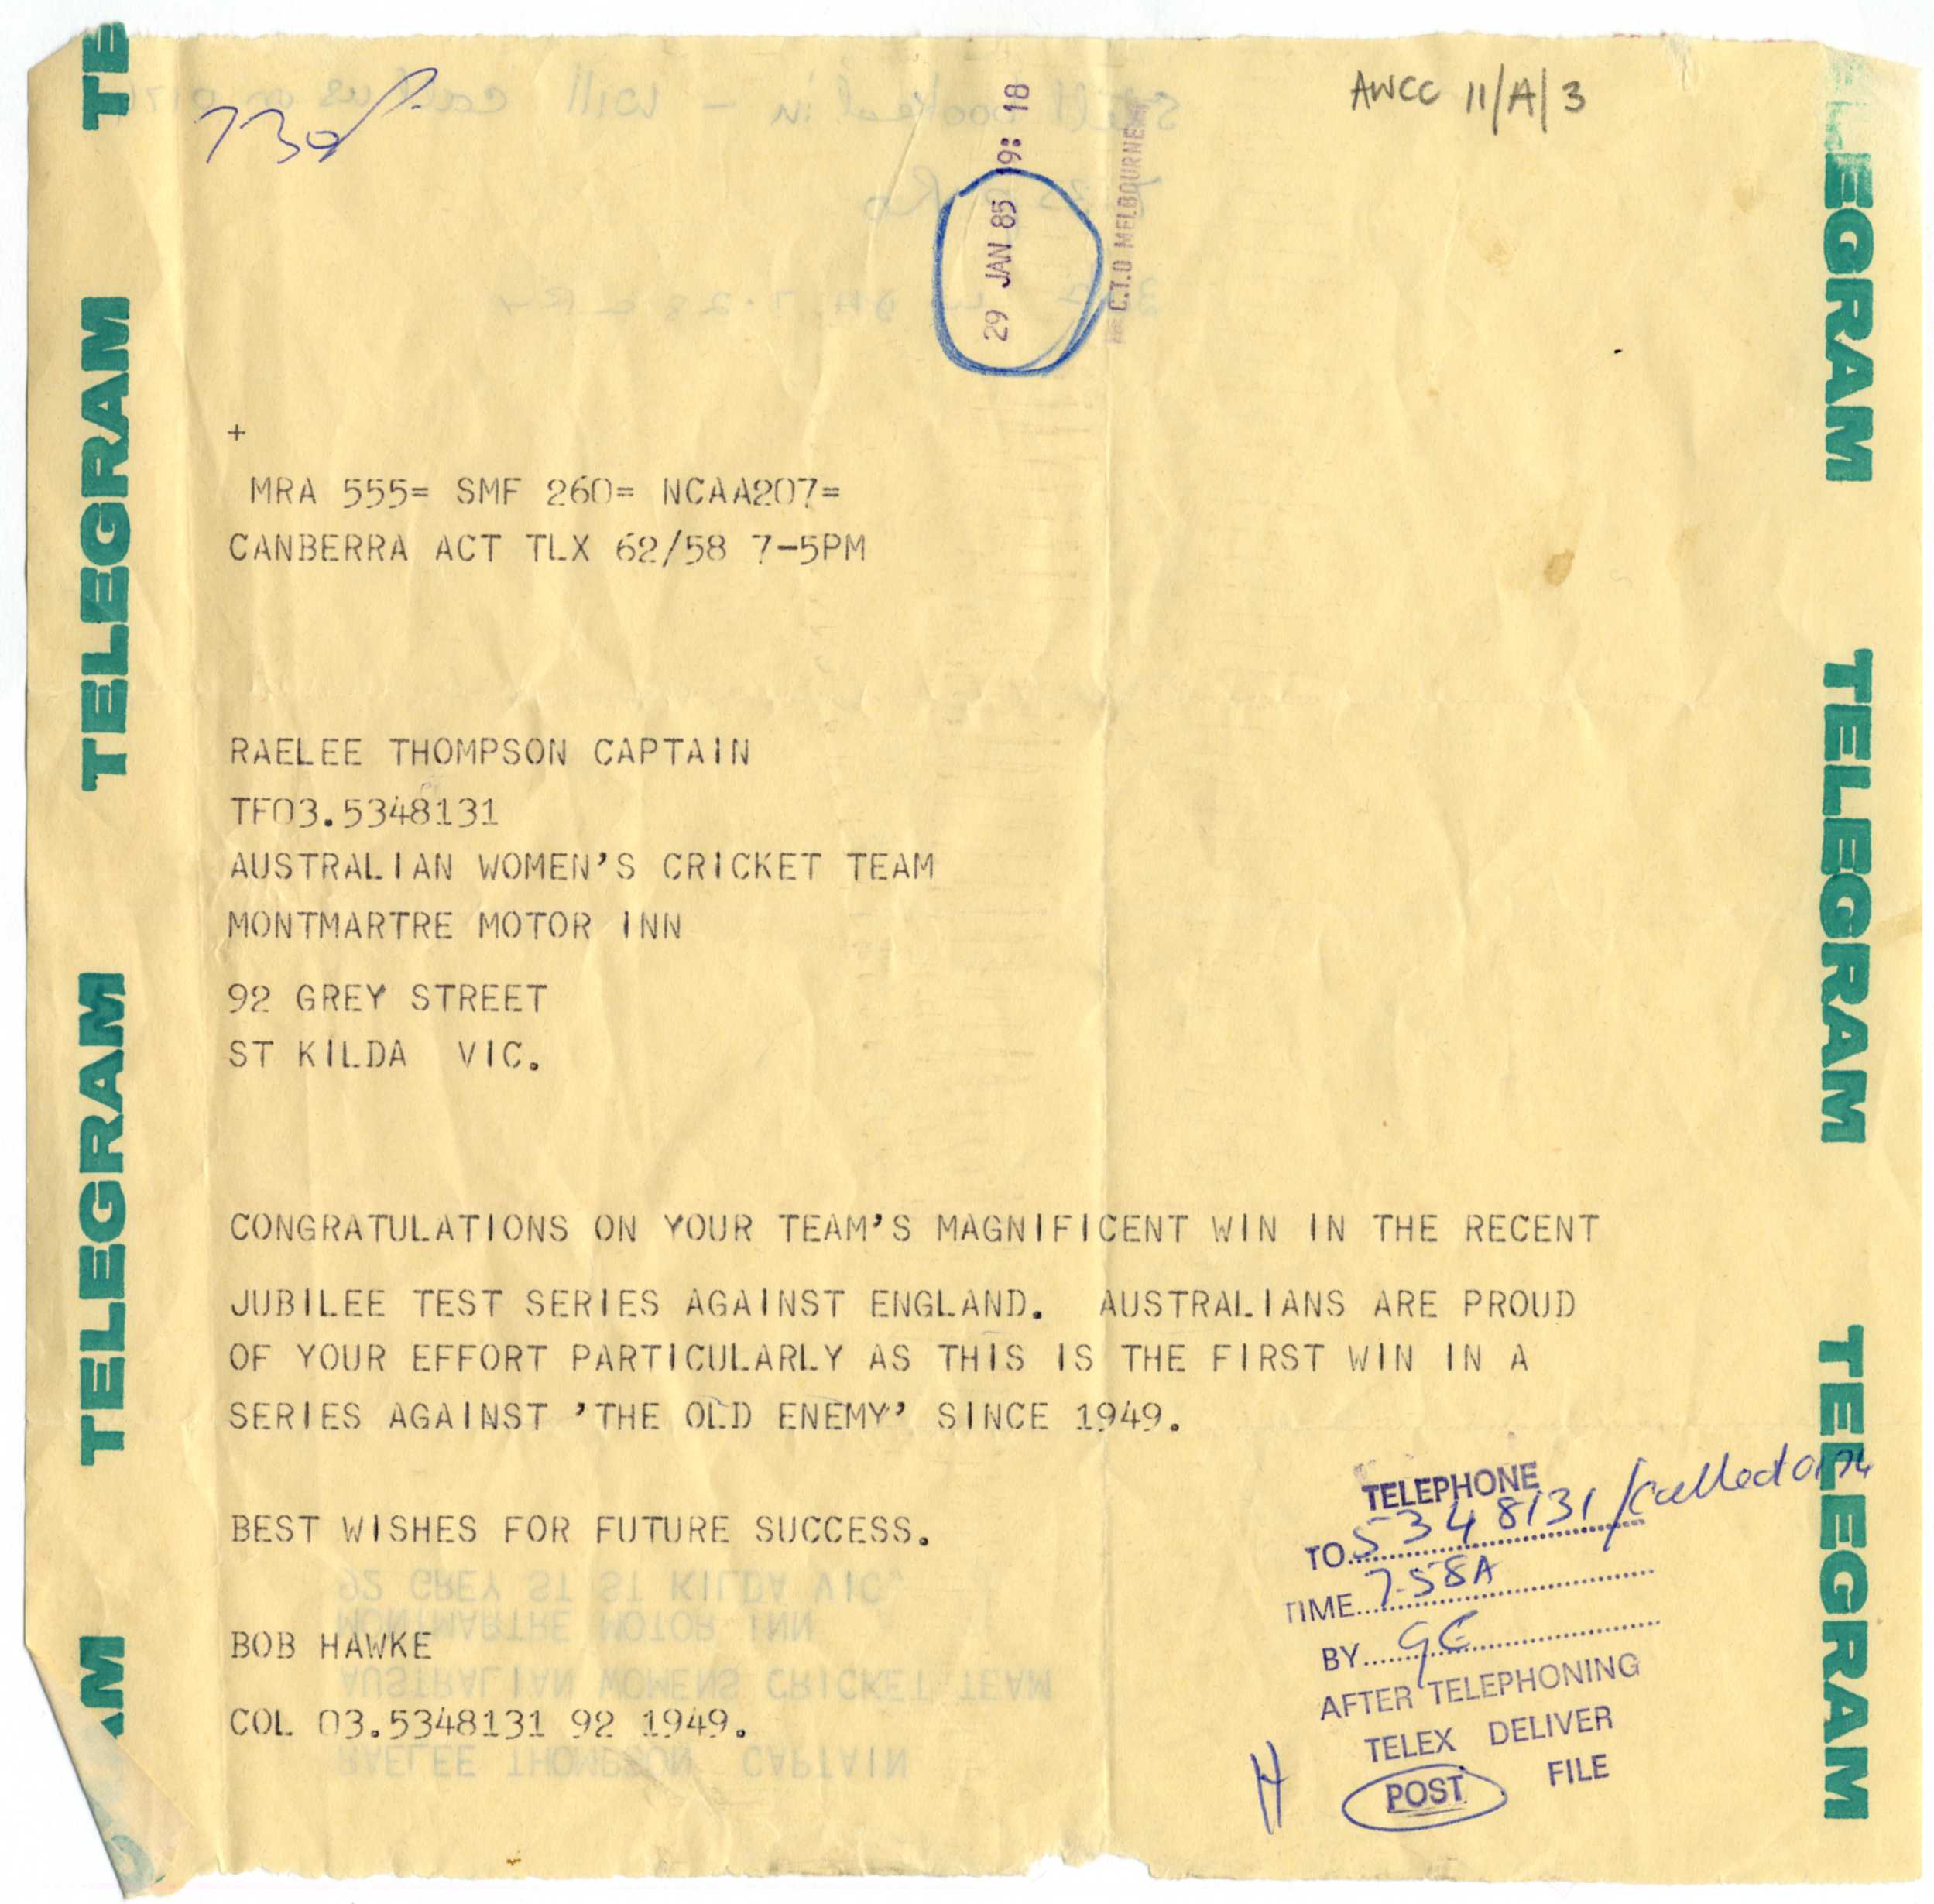 A telegram addressed to Thompson from Prime Minister Bob Hawke, congratulating her on the Jubilee Test series victory.